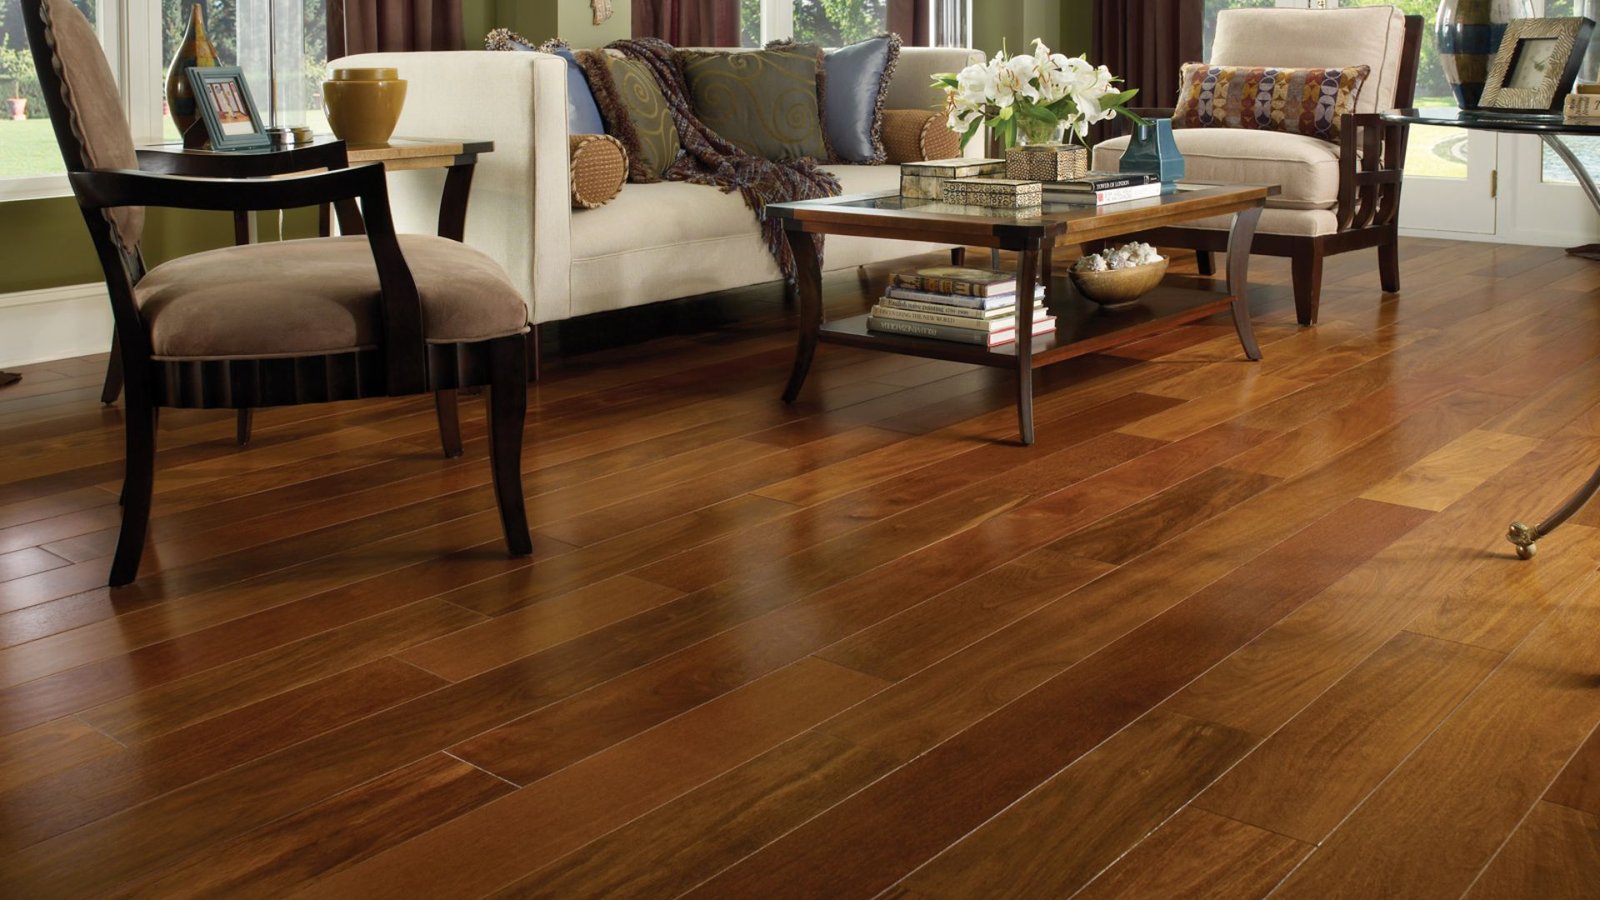 What Are the Benefits of Installing Wooden Parquet Flooring